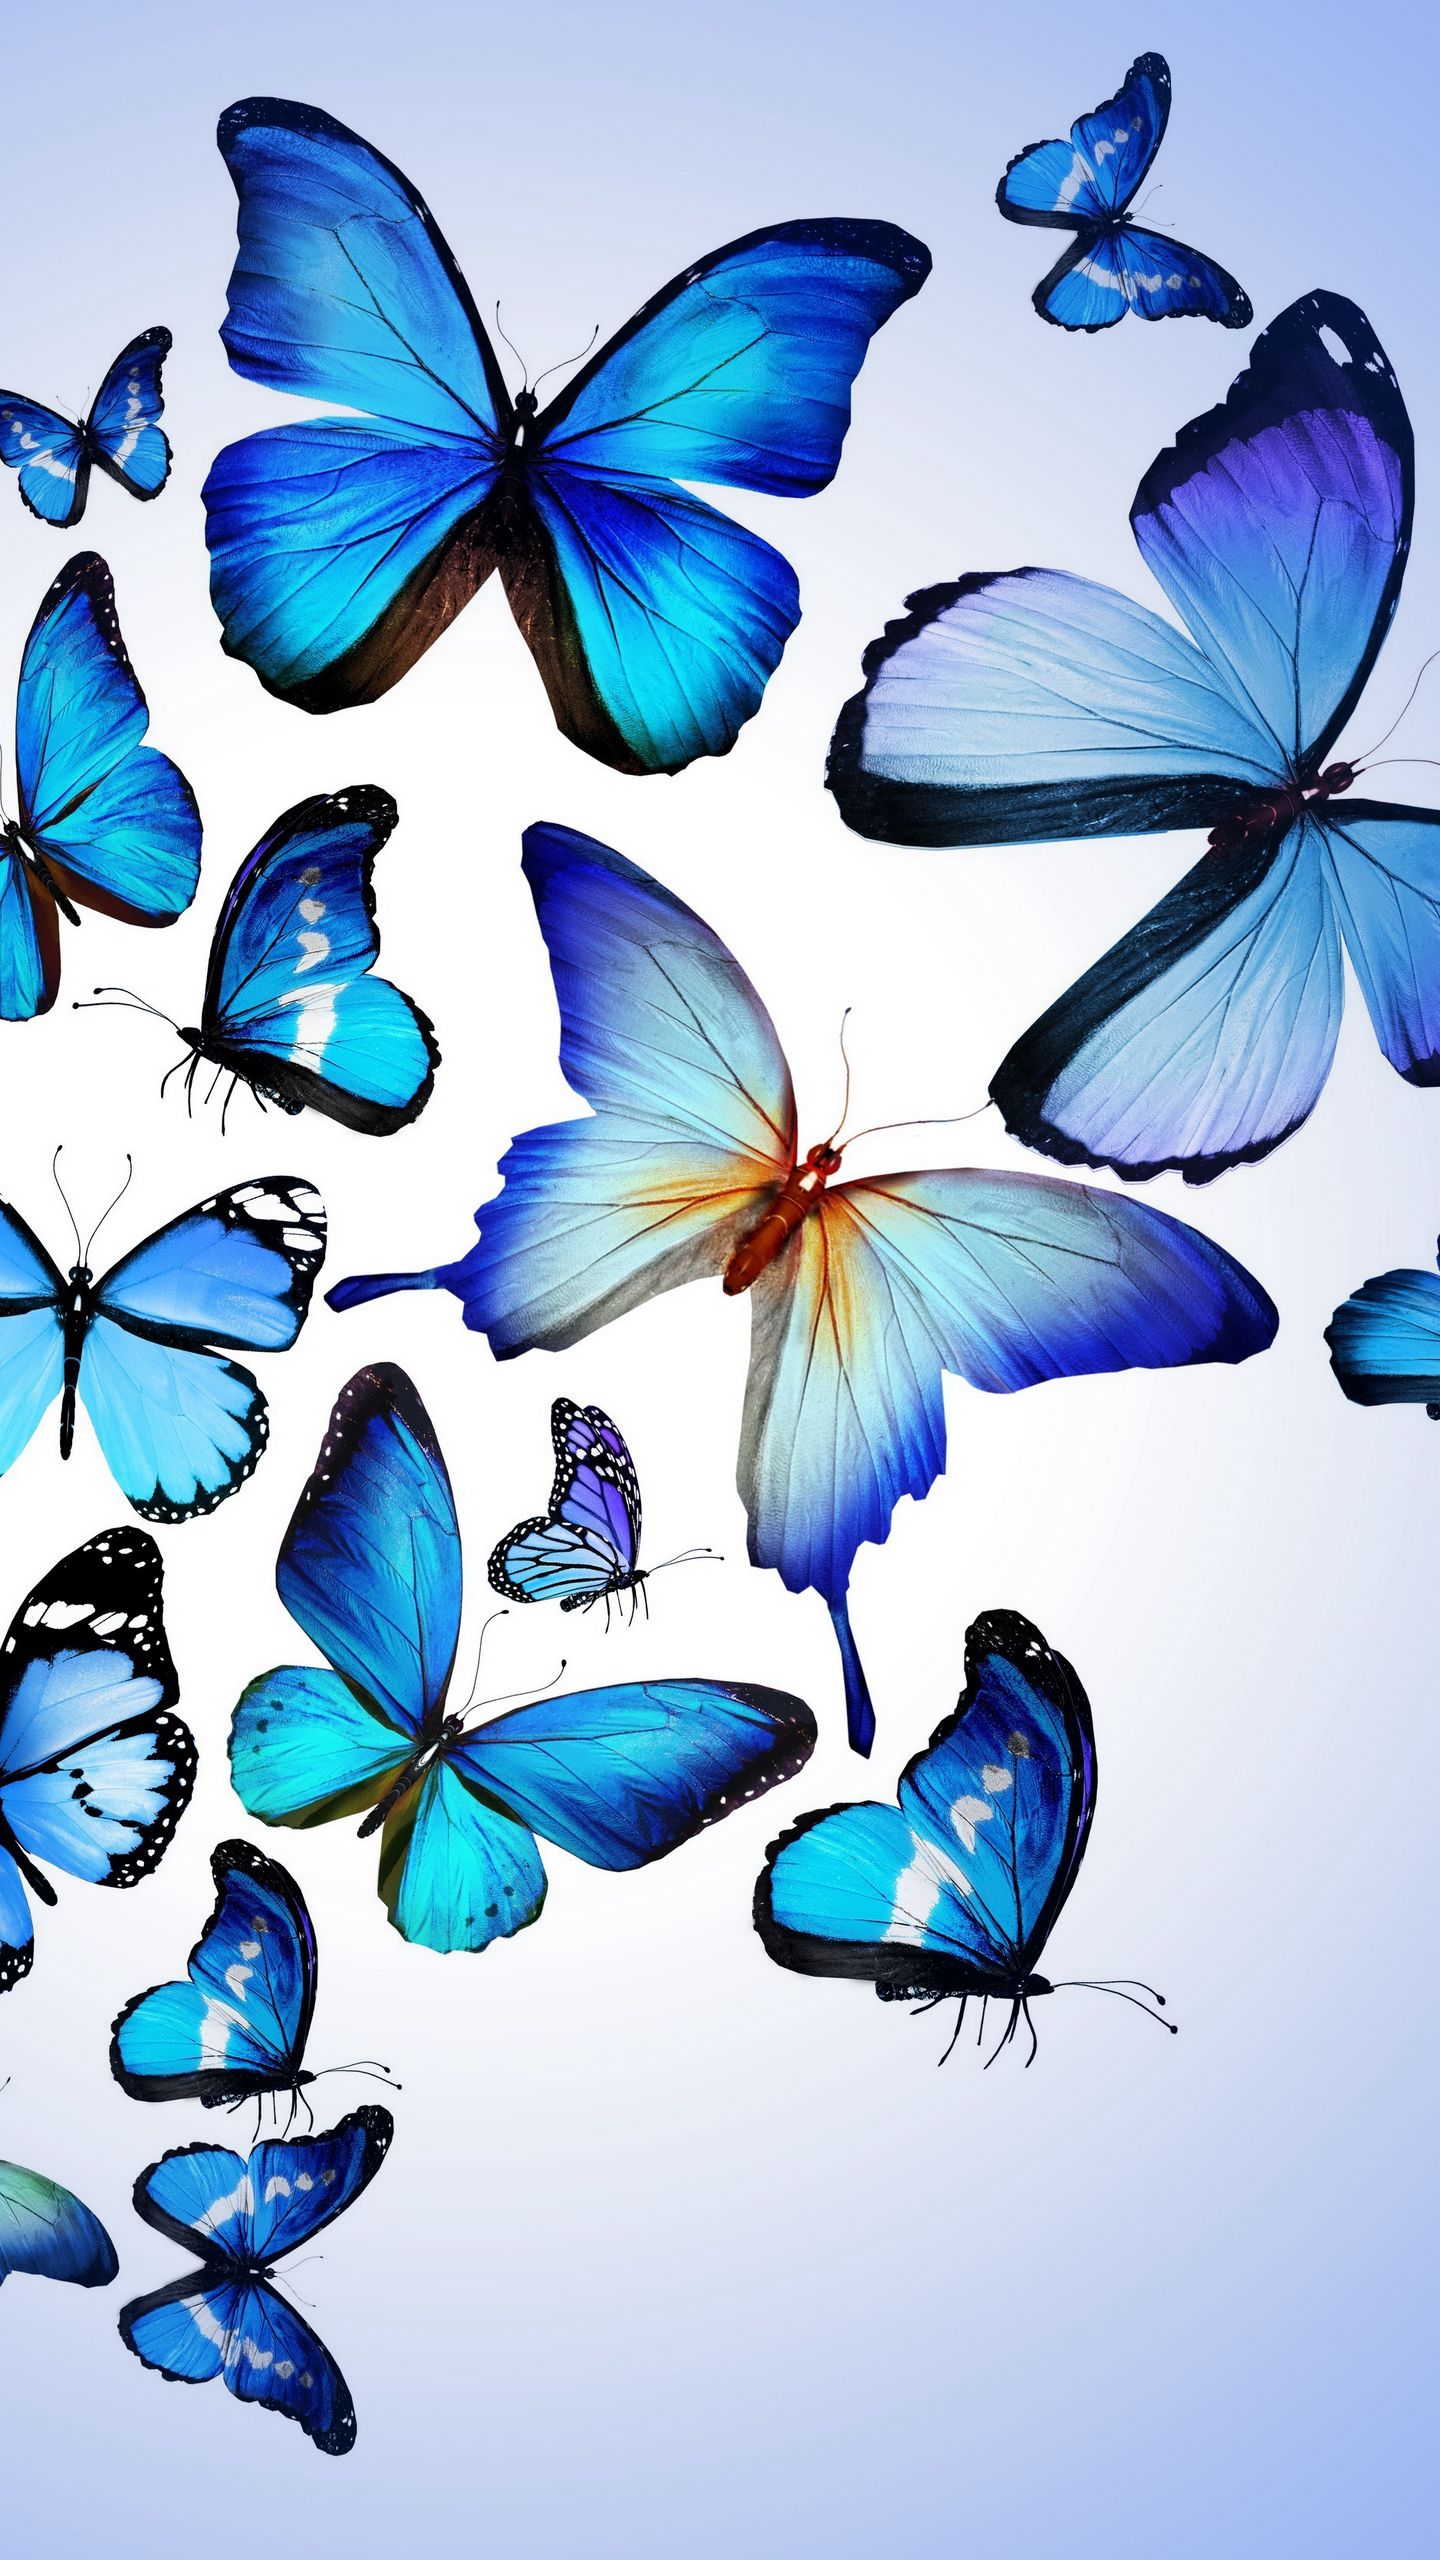 Download wallpaper 1440x2560 butterfly, colorful, blue, drawing, art, beautiful qhd samsung galaxy s s edge, note, lg g4 HD background